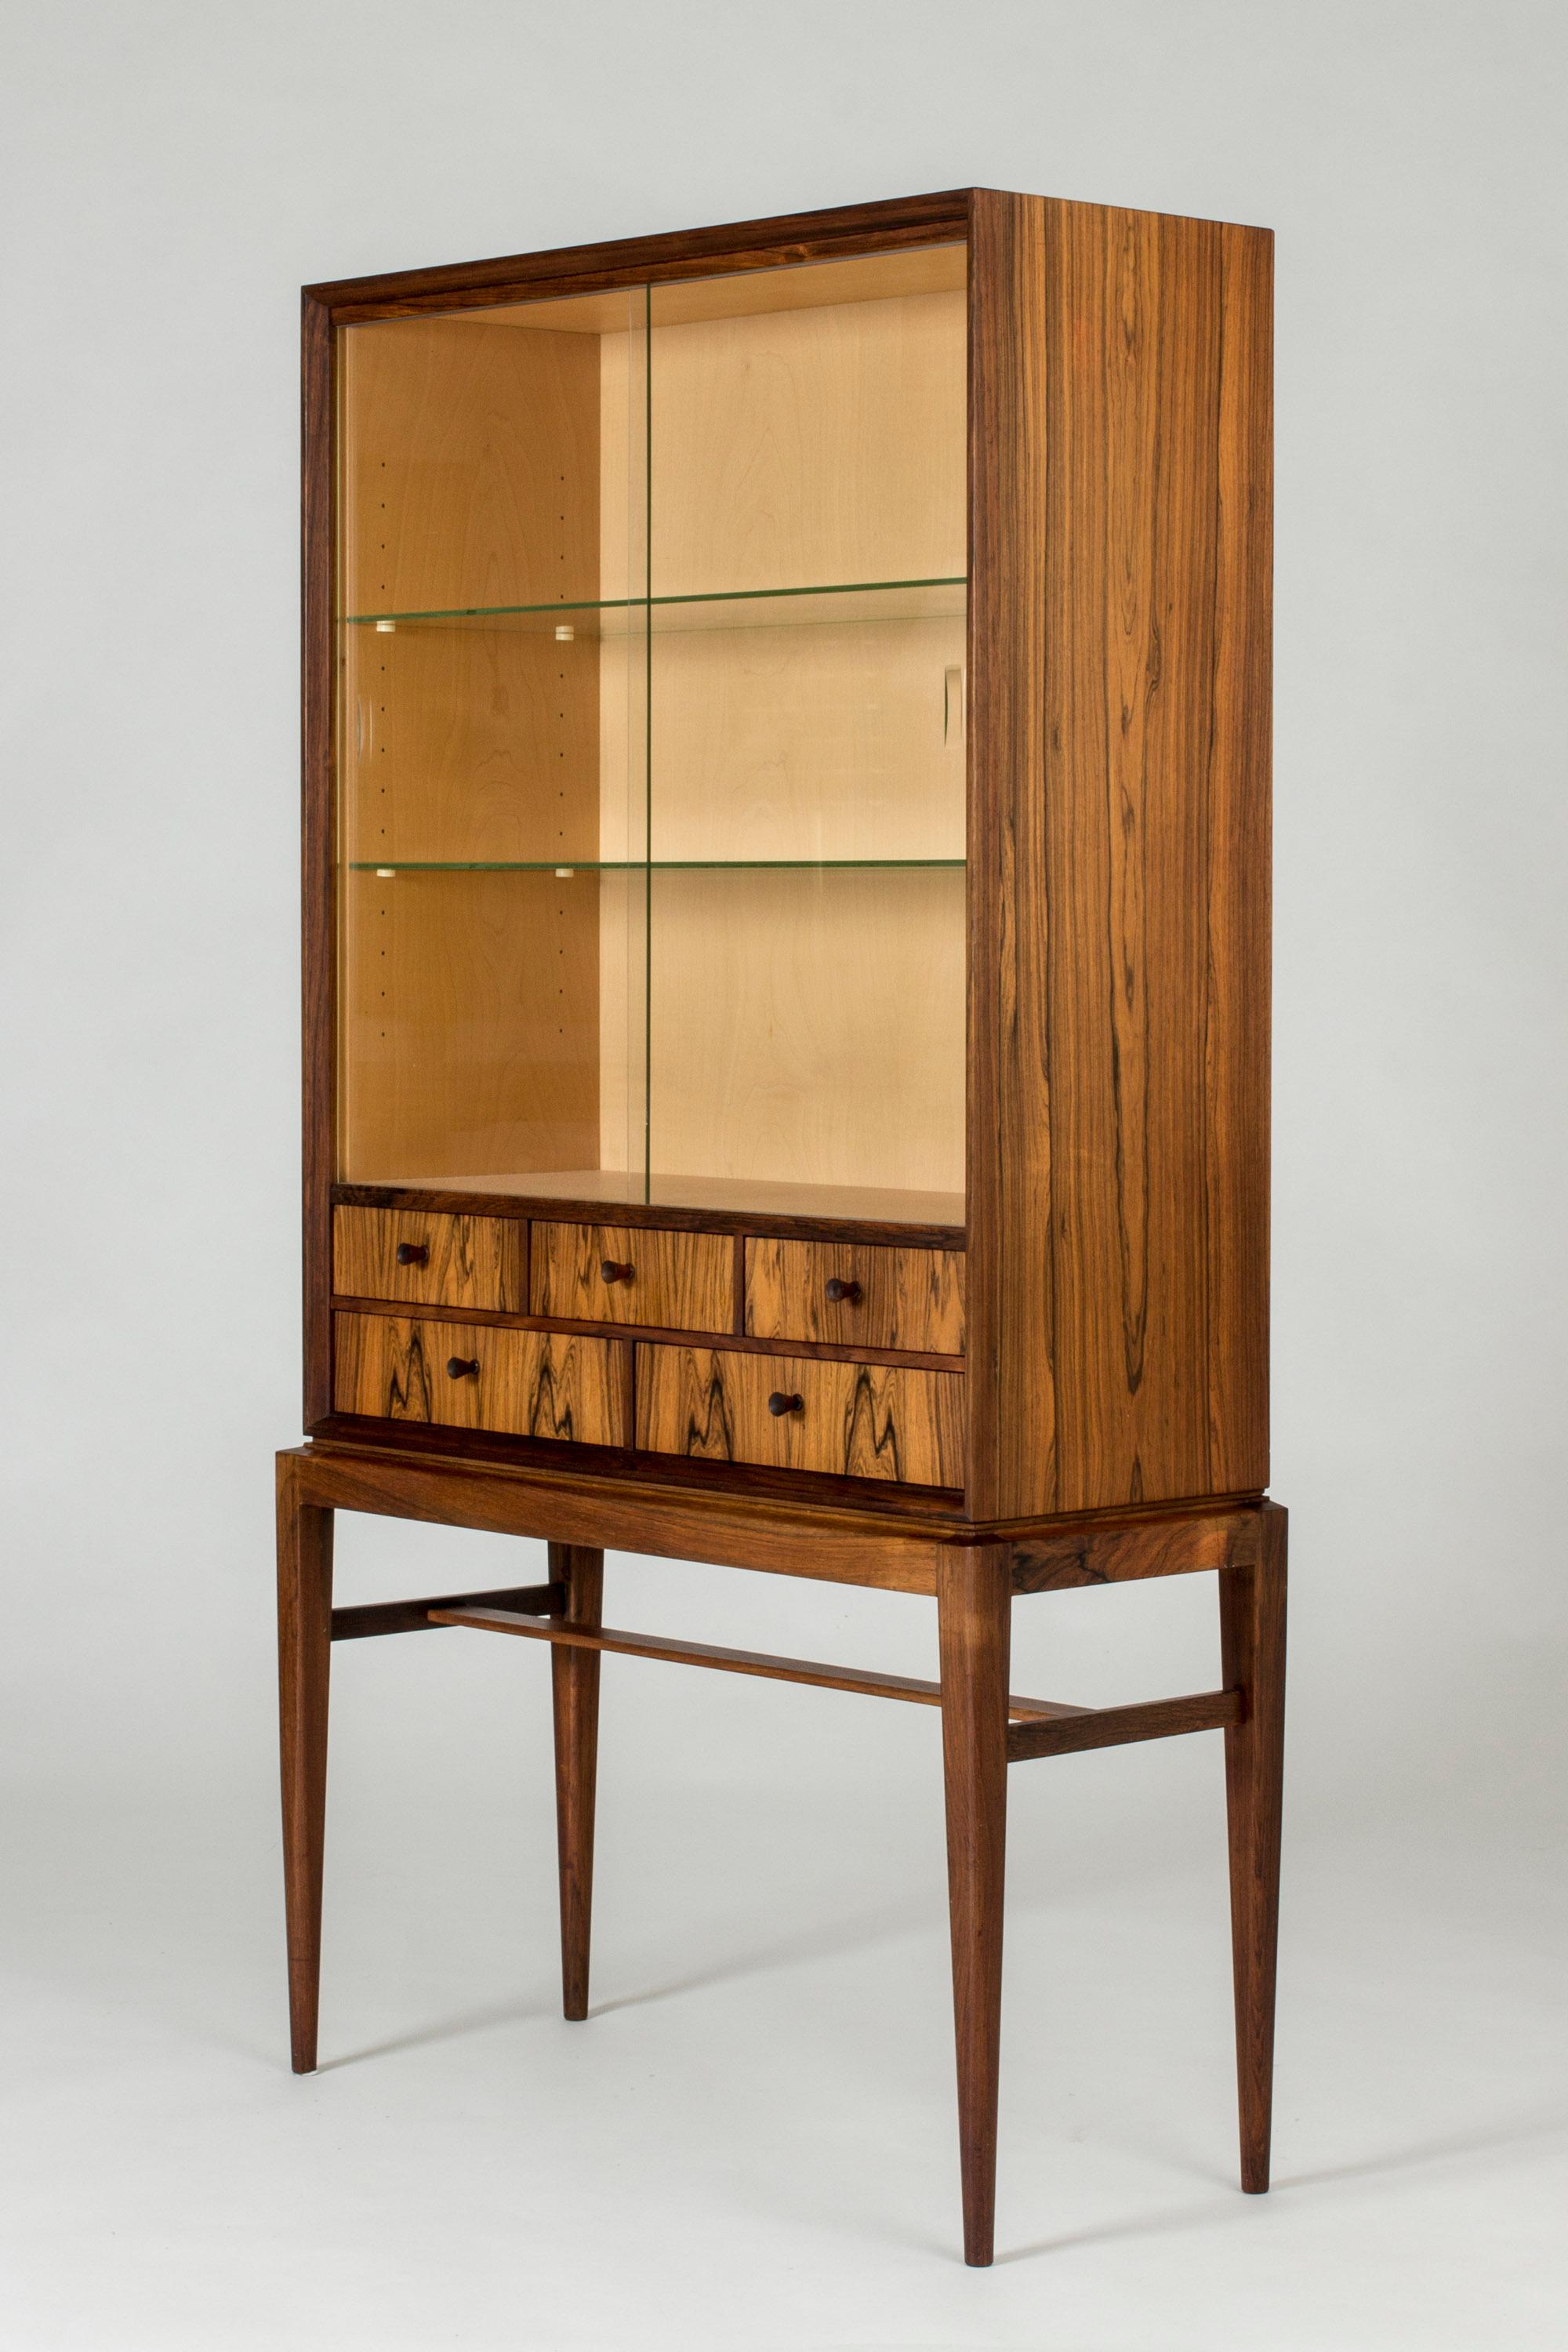 Mid-20th Century Midcentury Rosewood and Glass Vitrine Cabinet by Svante Skogh for Seffle